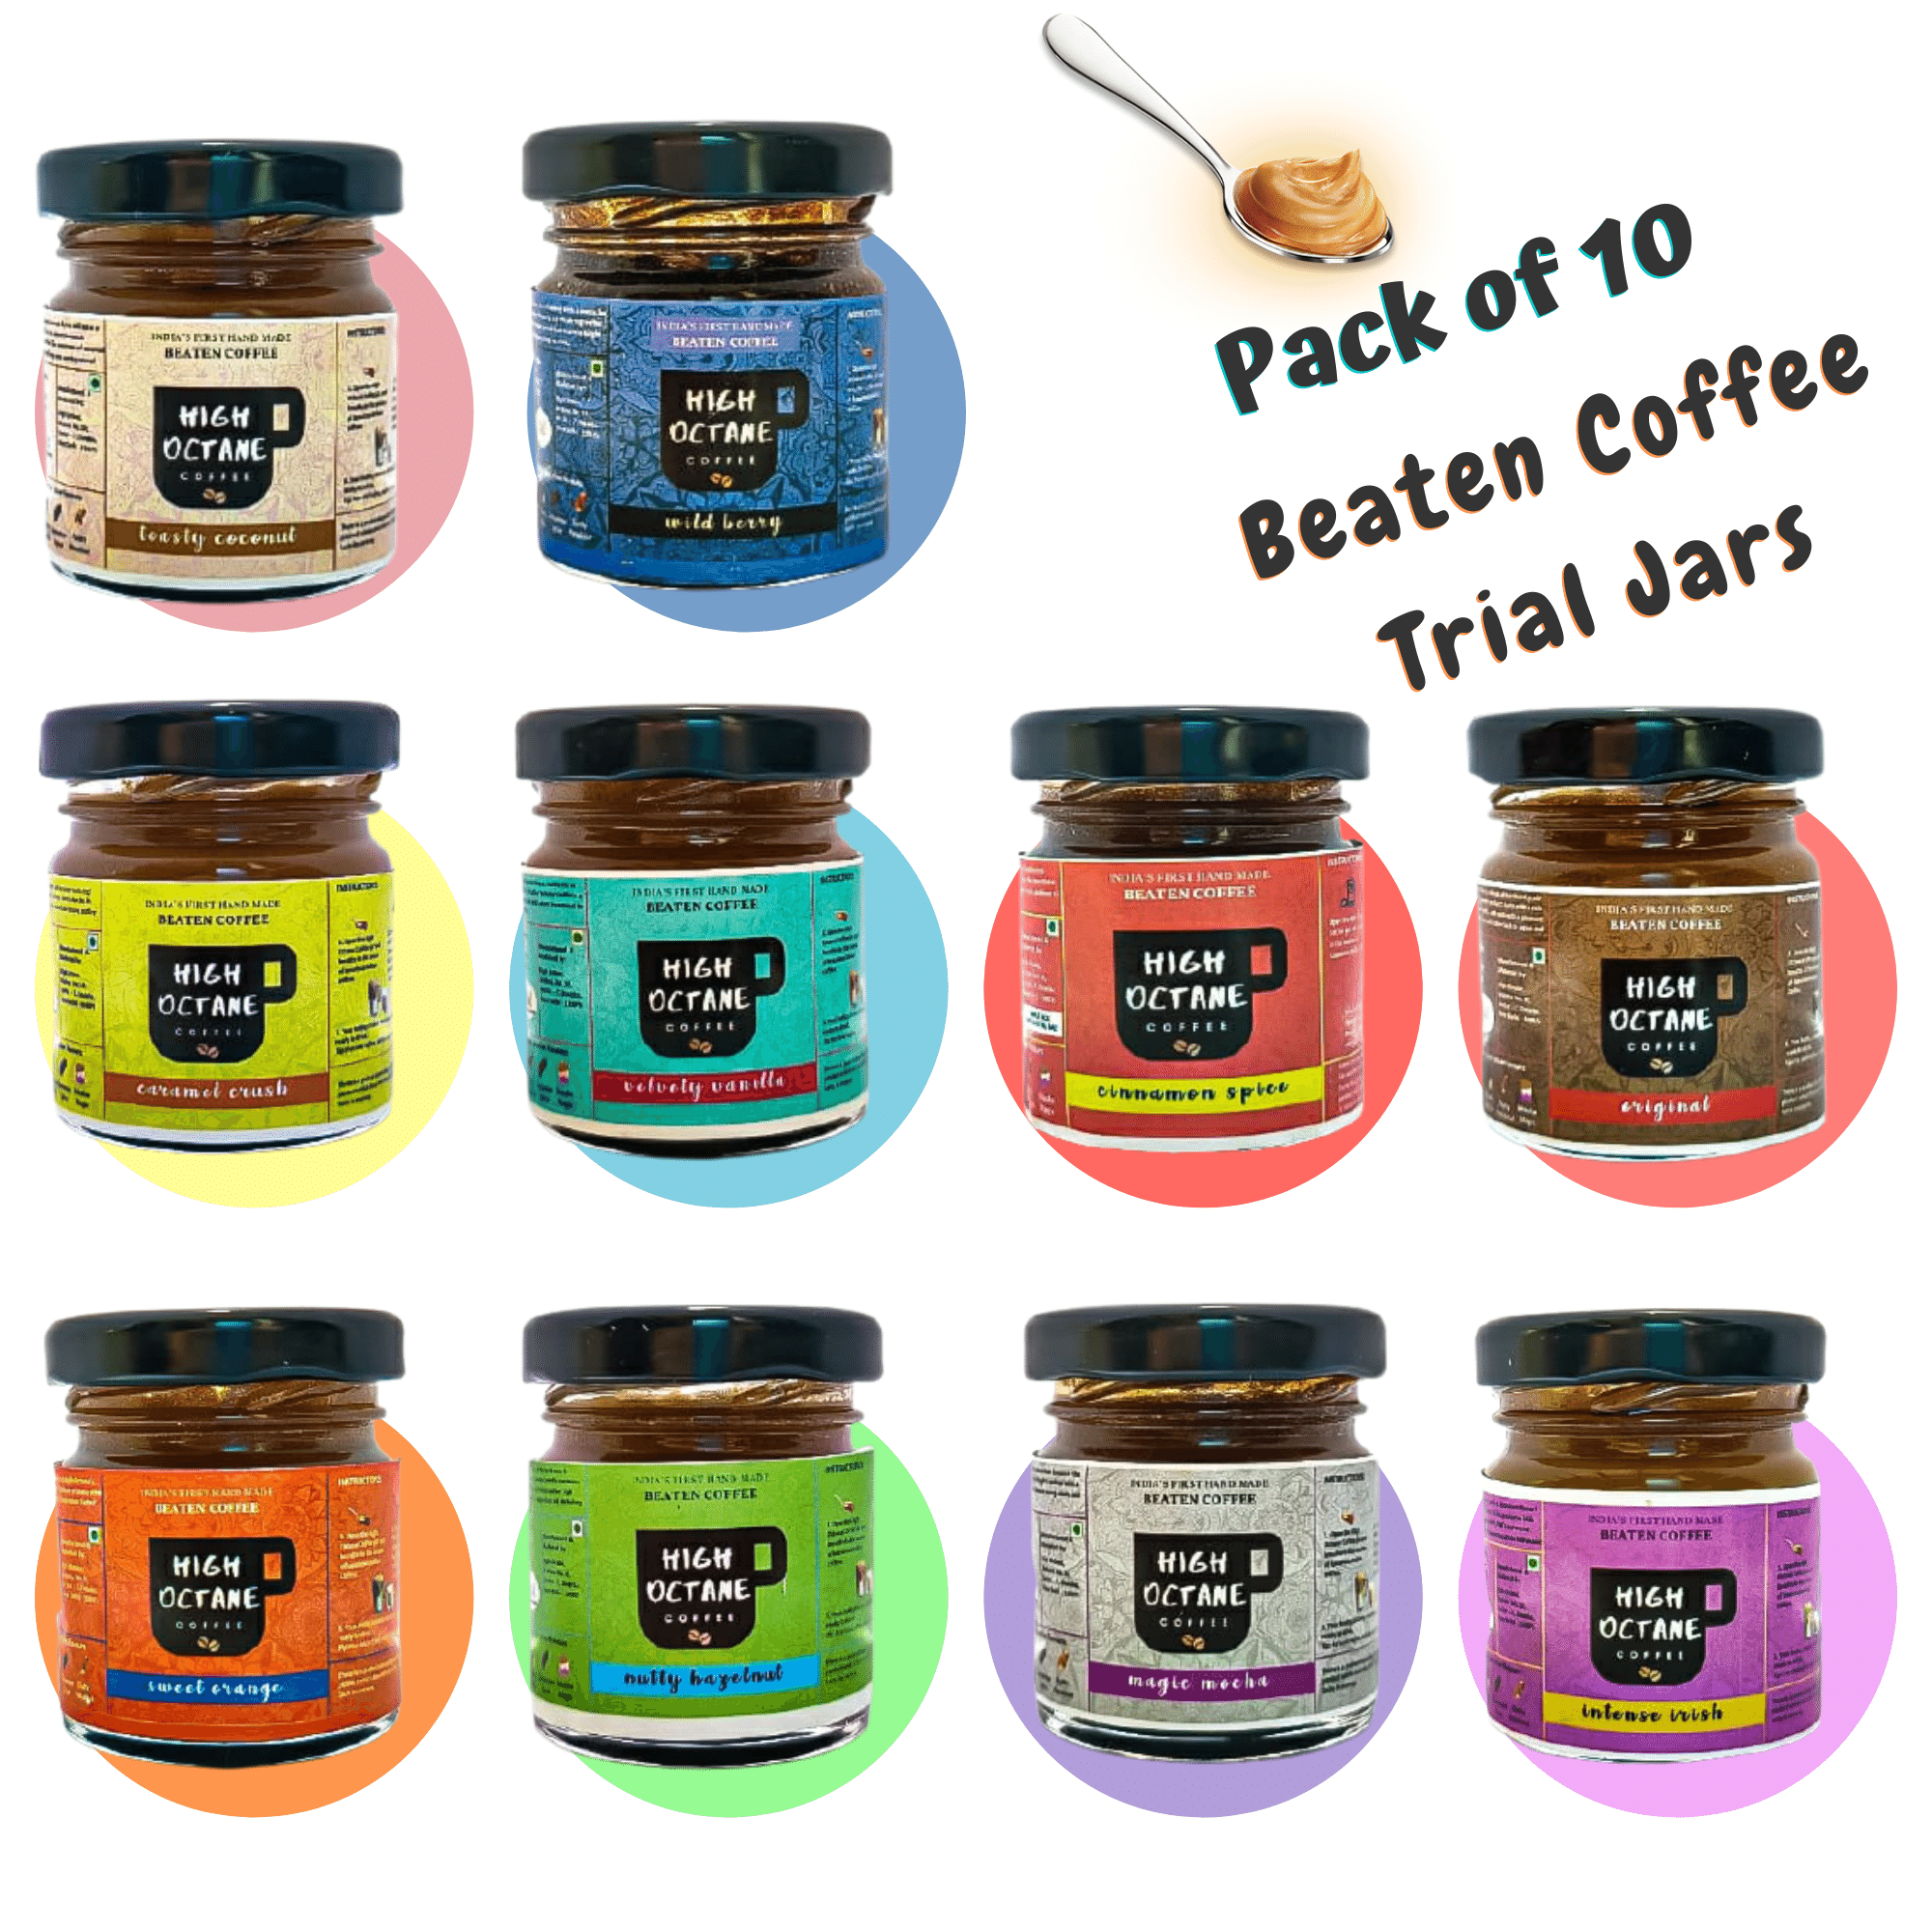 Not Sure What to Buy? Try All Flavours of Beaten Coffee Sampler Set - 30g Trial Jars !